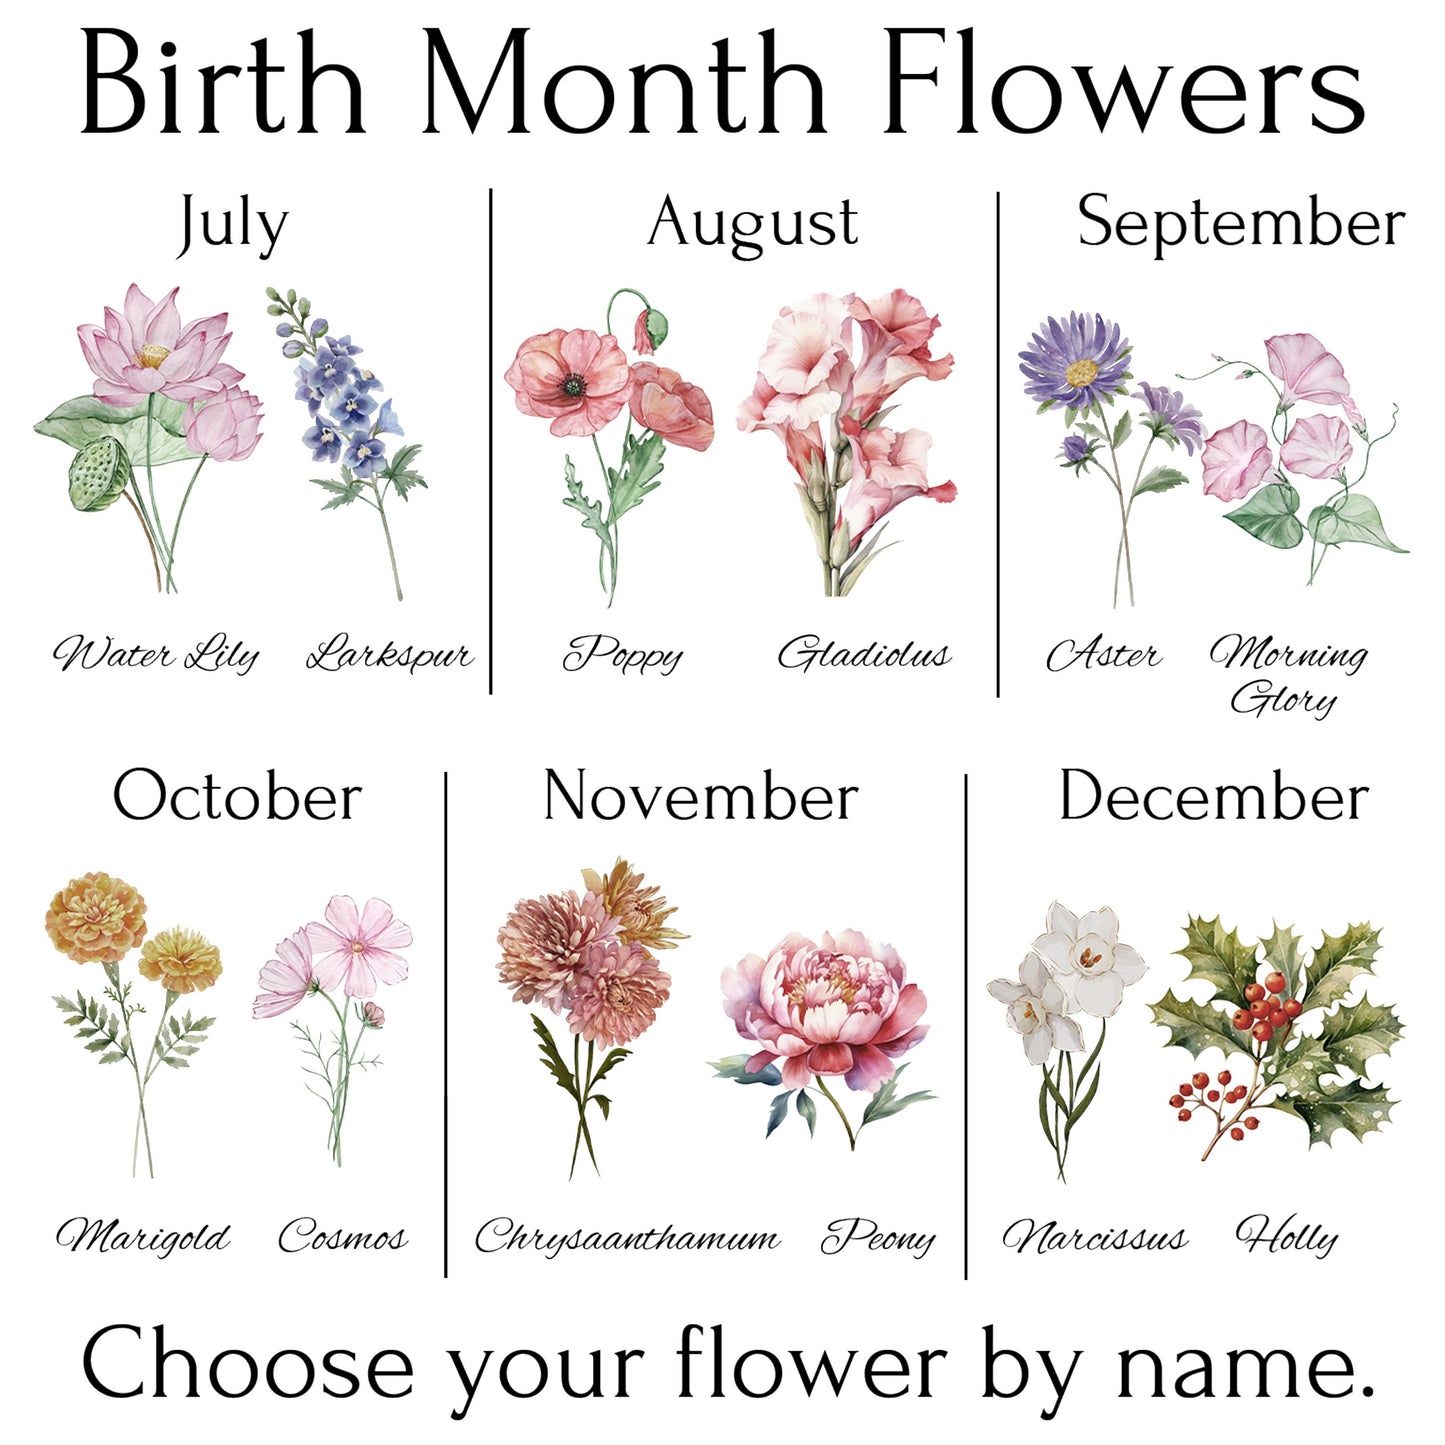 Personalized Mother's Day Gift for Mom or Grandma | Personalized Garden Pillow Birth Month Flower Bouquet Art | Custom Mother's Day Gift